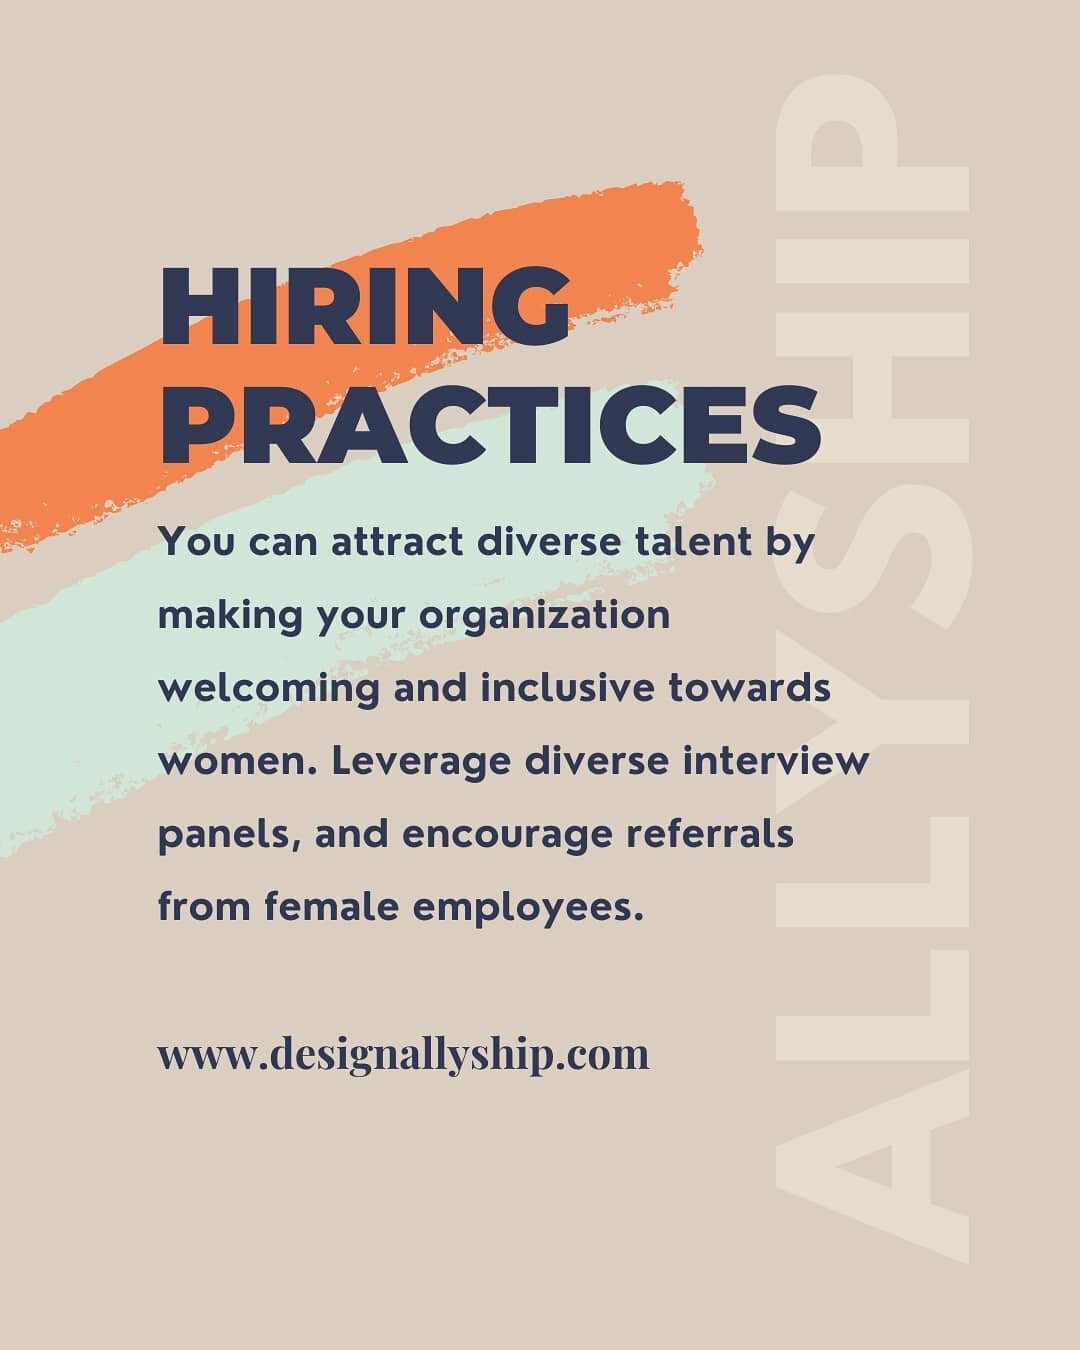 Hiring diverse candidates is half the battle - making sure your company is welcoming and inclusive to potential employees is a great way to attract diverse talent. You can find more in-depth resources in our Allyship Guide (link in the bio!) What tip